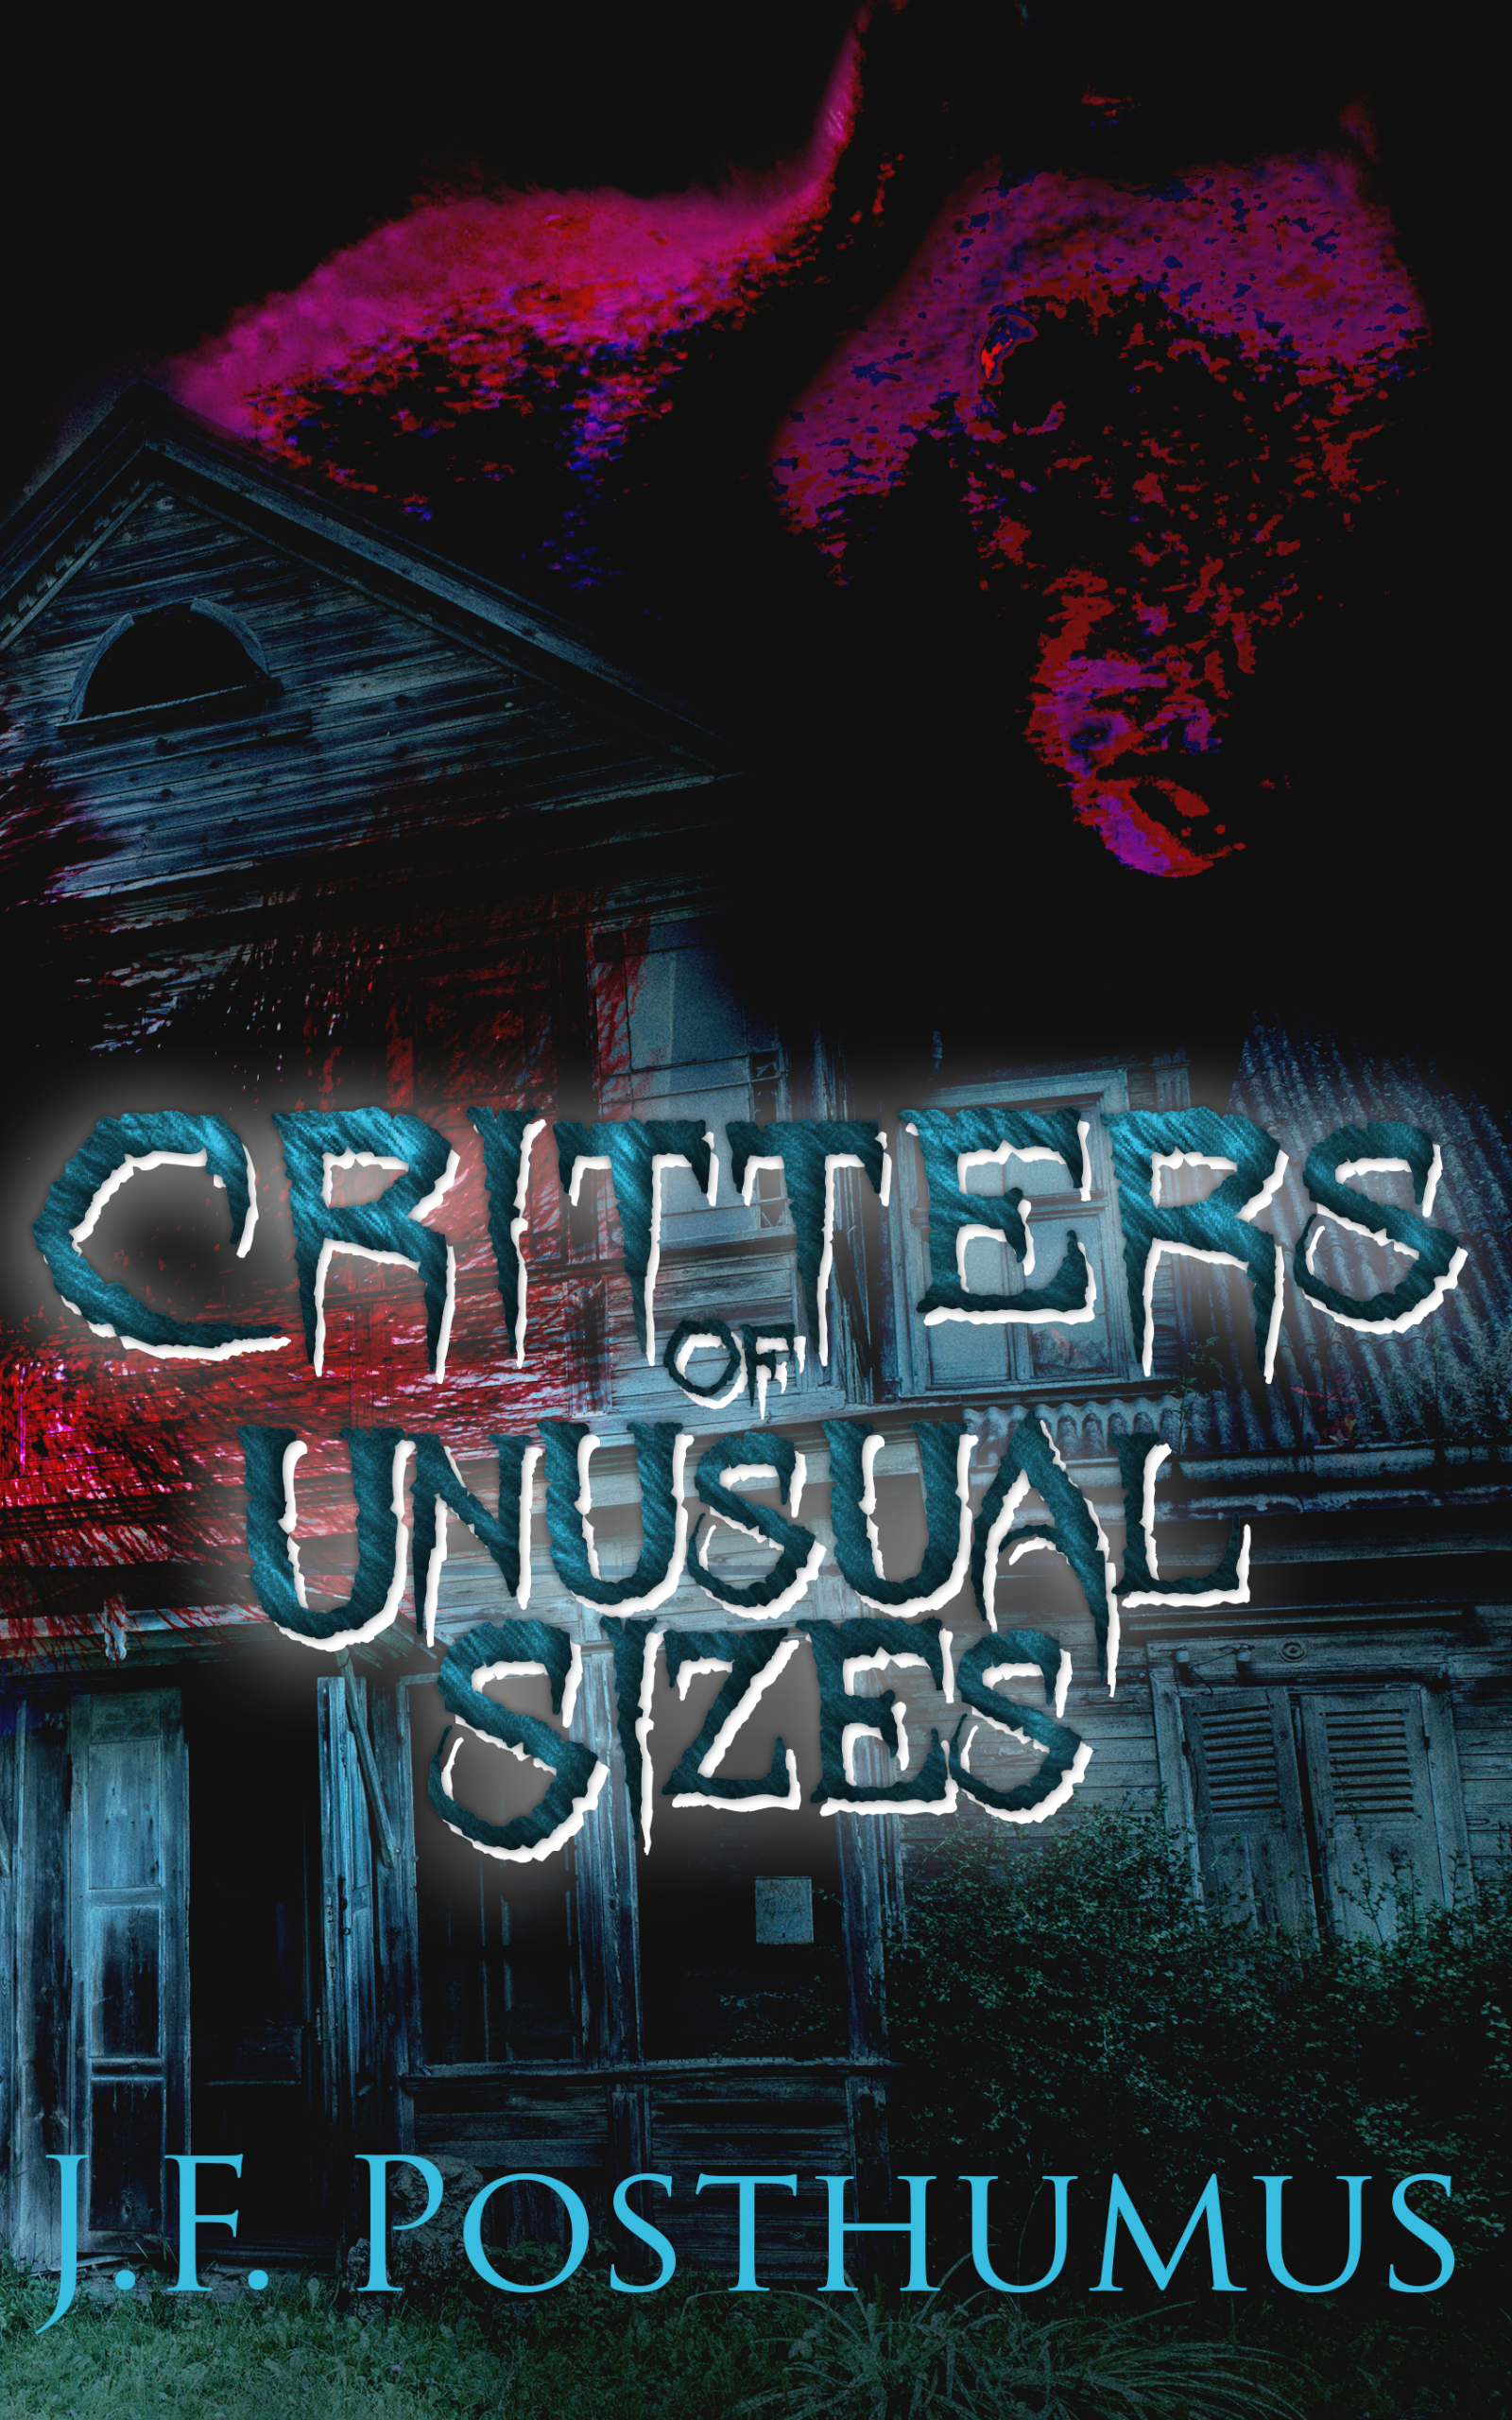 Critters Of Unusual Size, just in time for Halloween!